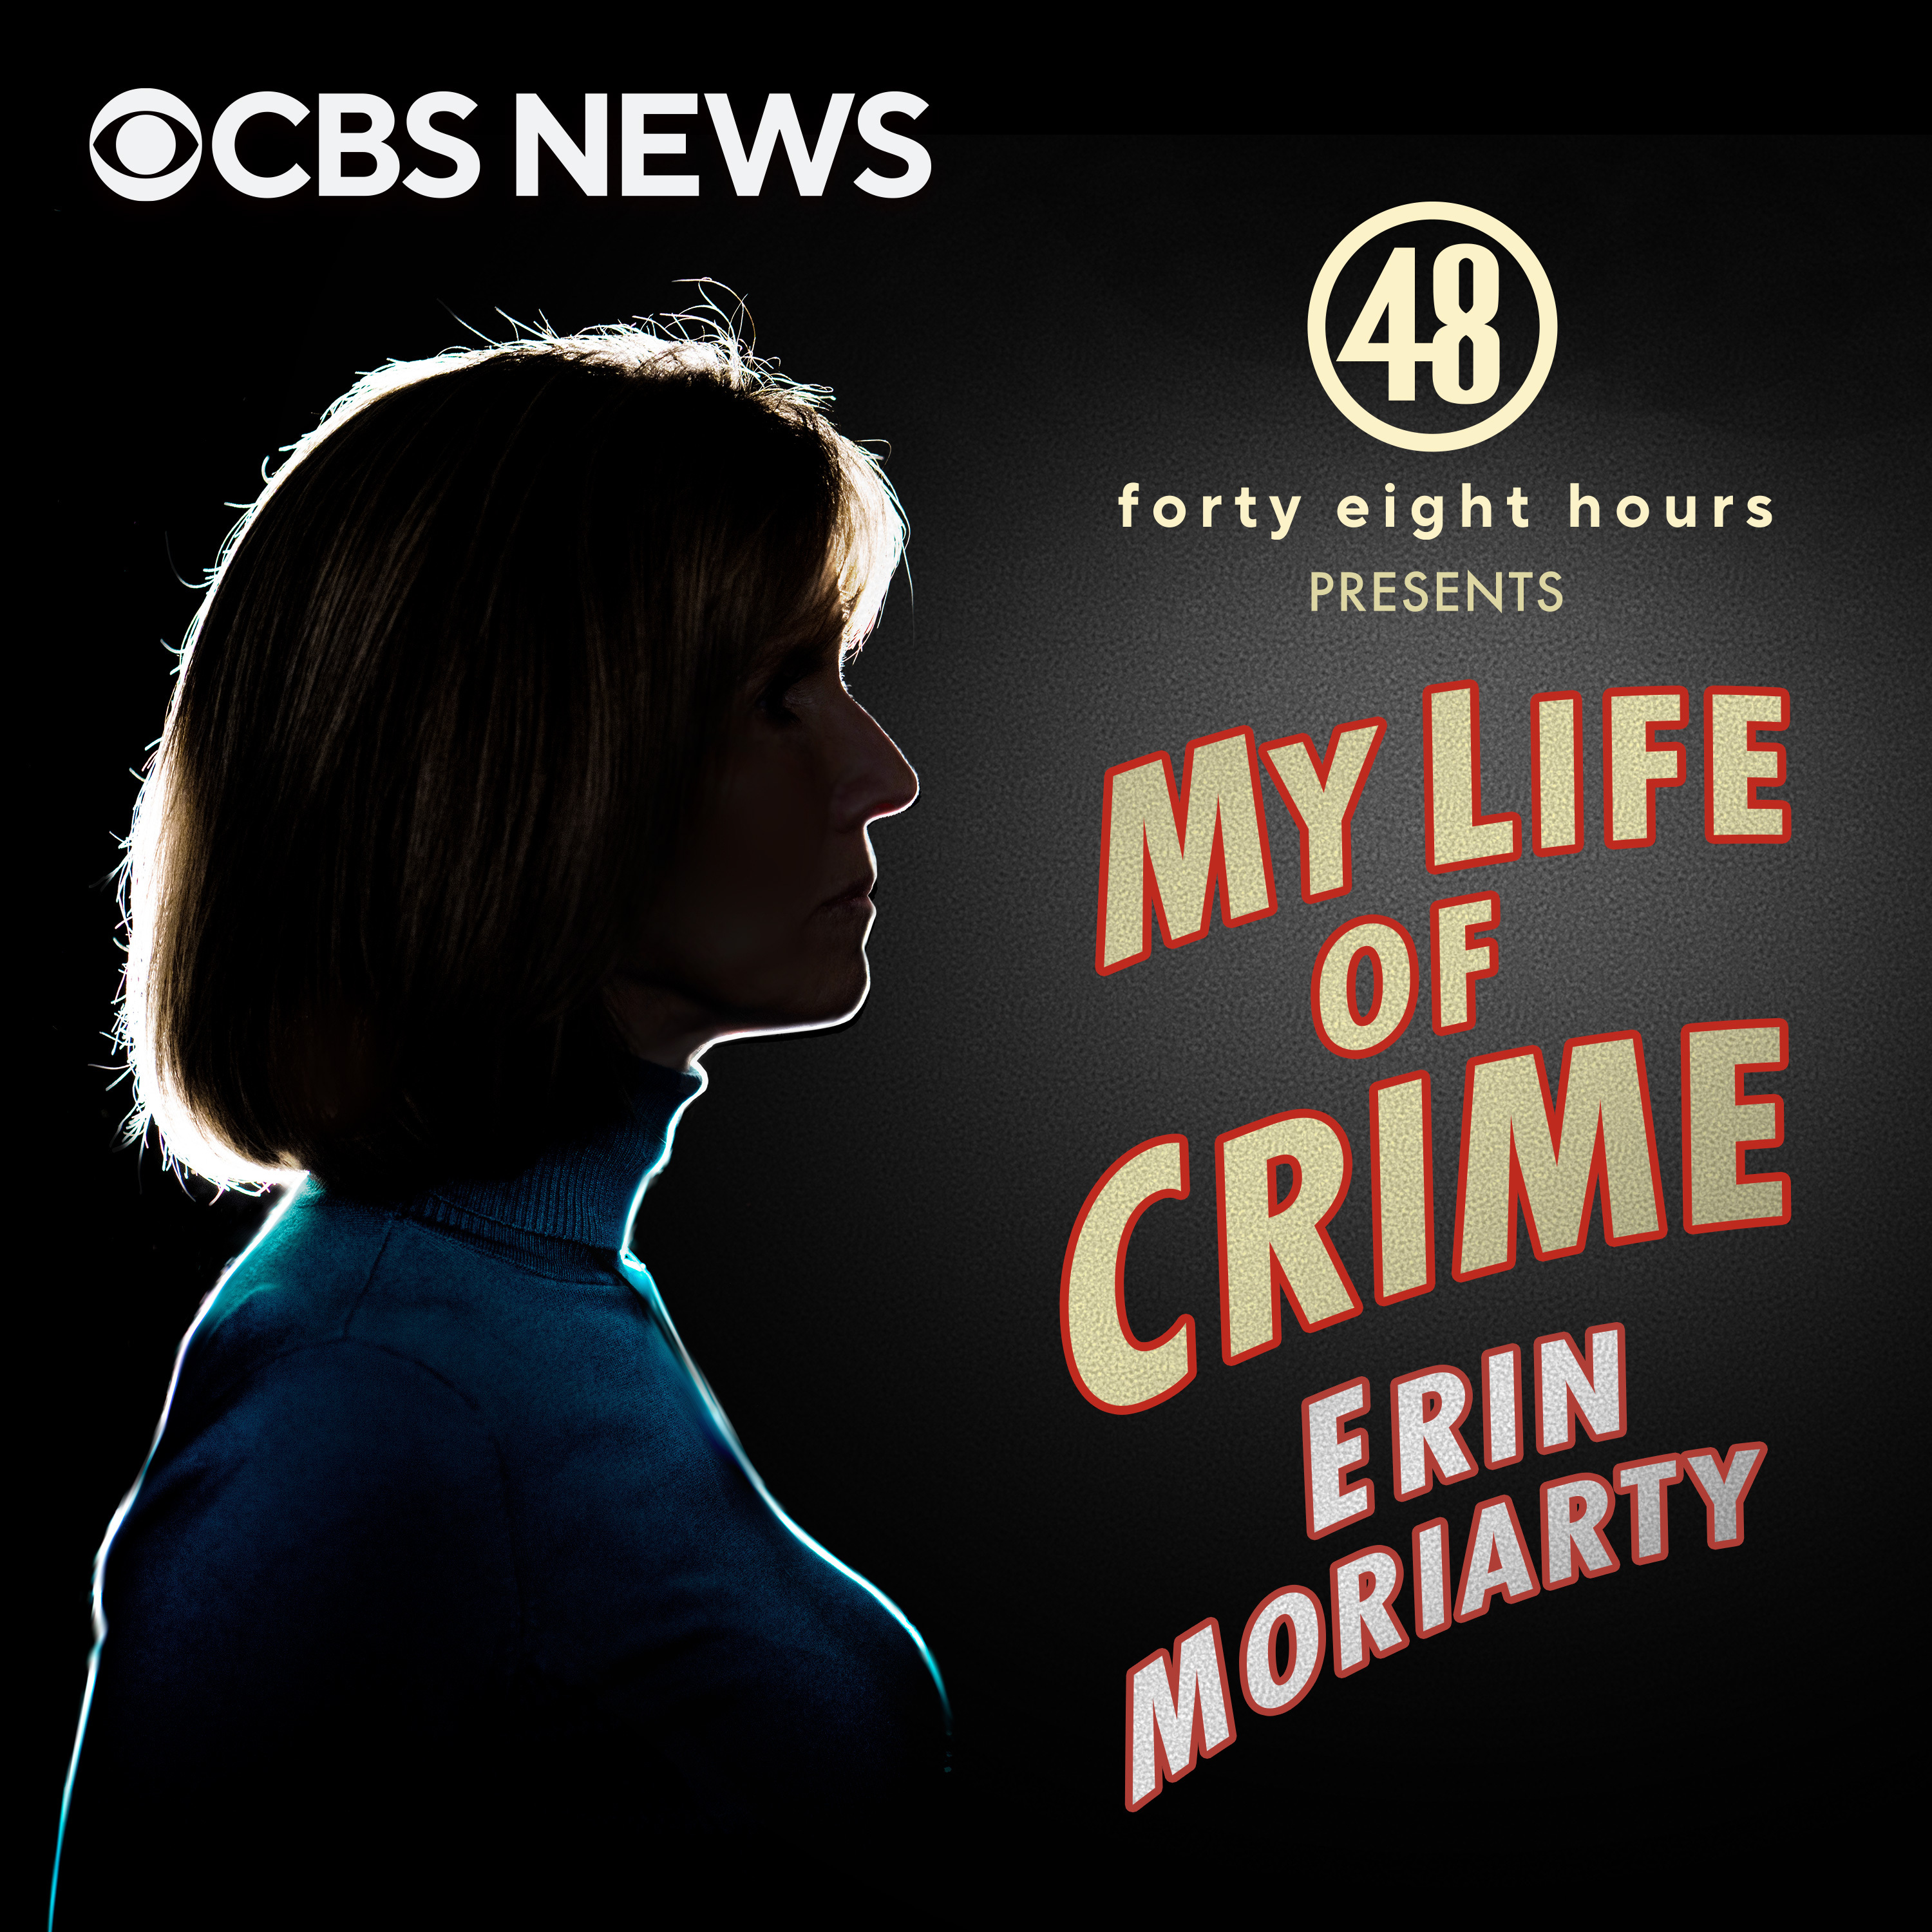 The Flim-Flam Man: The Disappearance of Jamie Laiaddee | My Life of Crime by CBS News